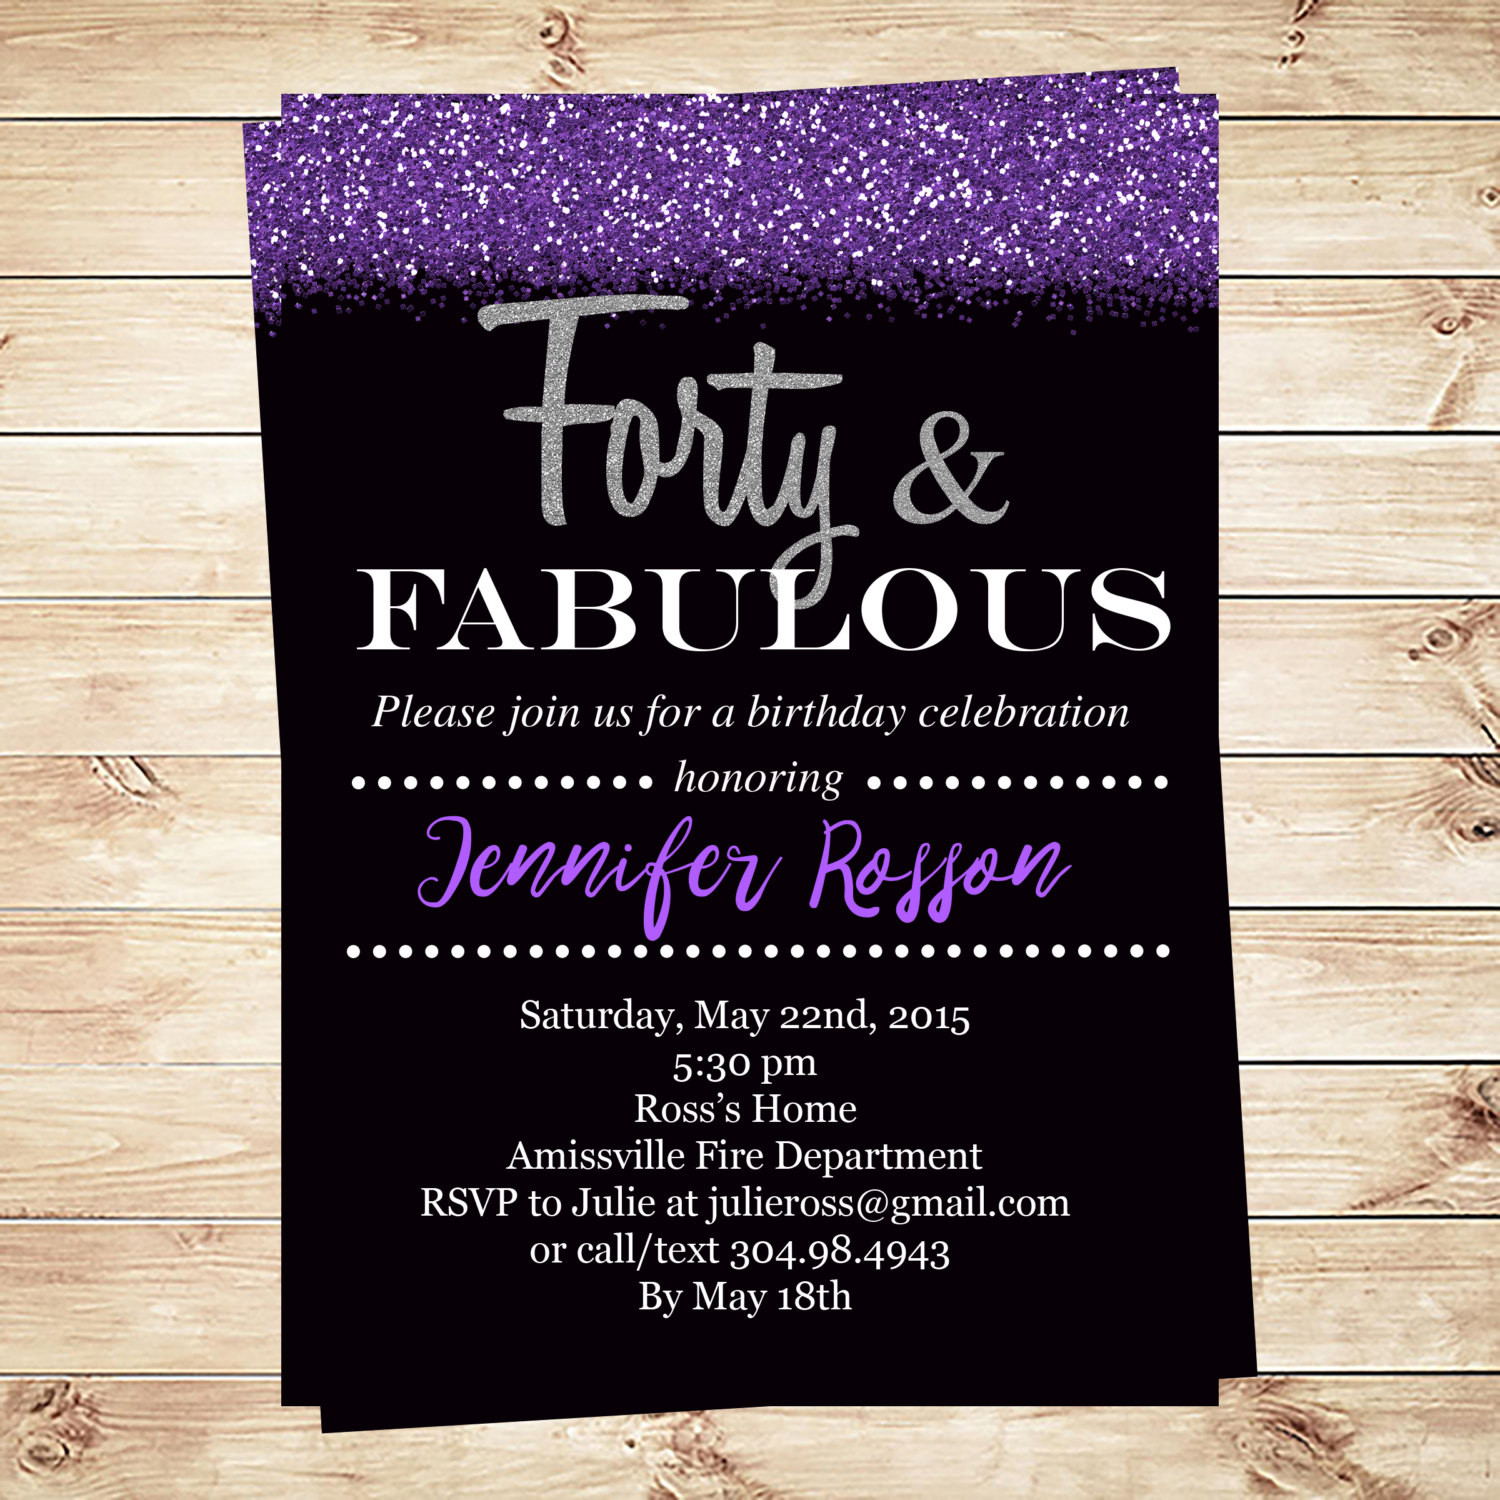 40th Birthday Invitation Ideas
 Forty and Fabulous Printable Party Invitations 40th Birthday